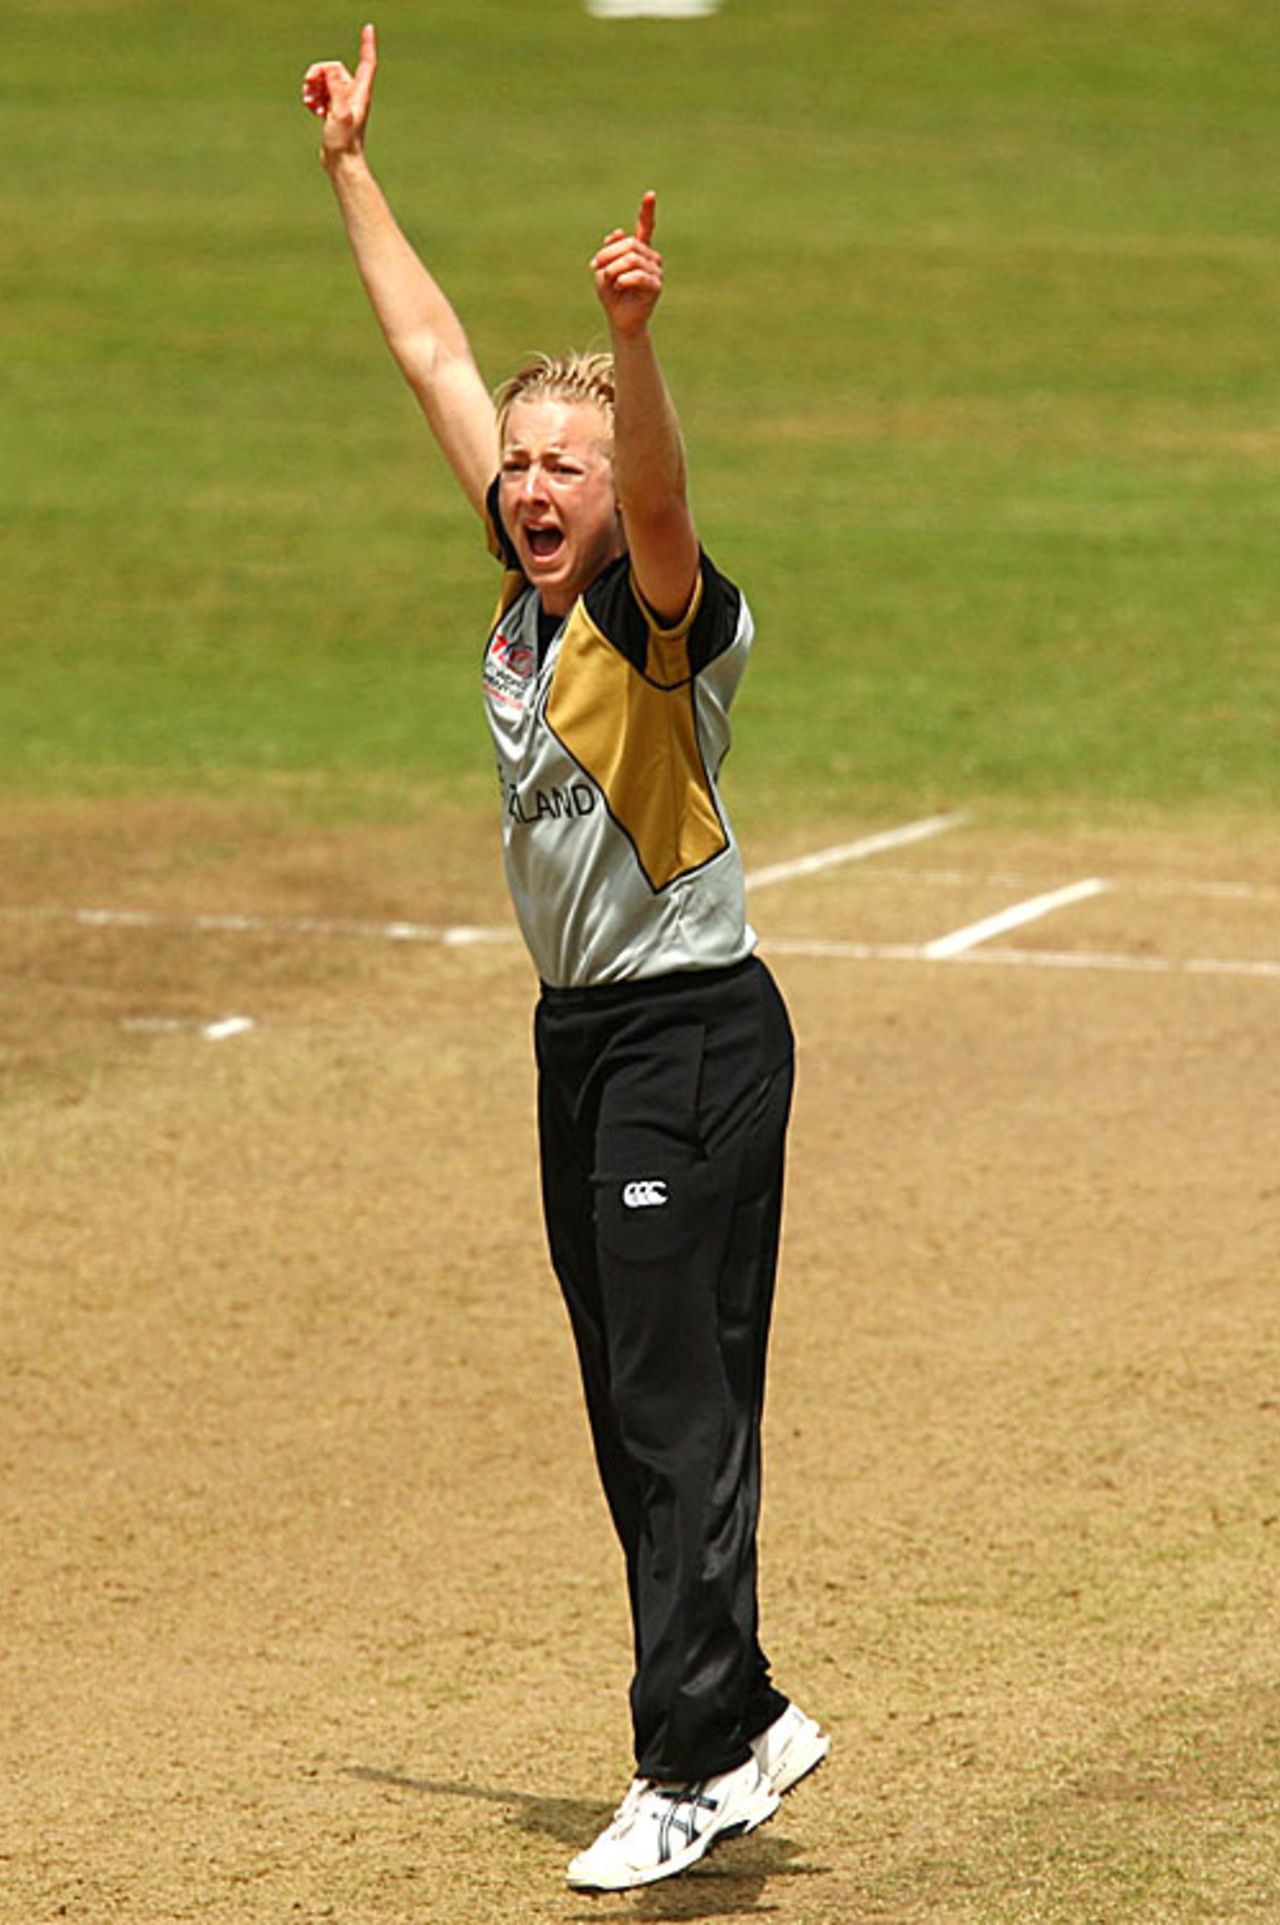 Sian Ruck successfully appeals for the wicket of Shandre Fritz, New Zealand v South Africa, ICC Women's World Twenty20, Taunton, June 15, 2009